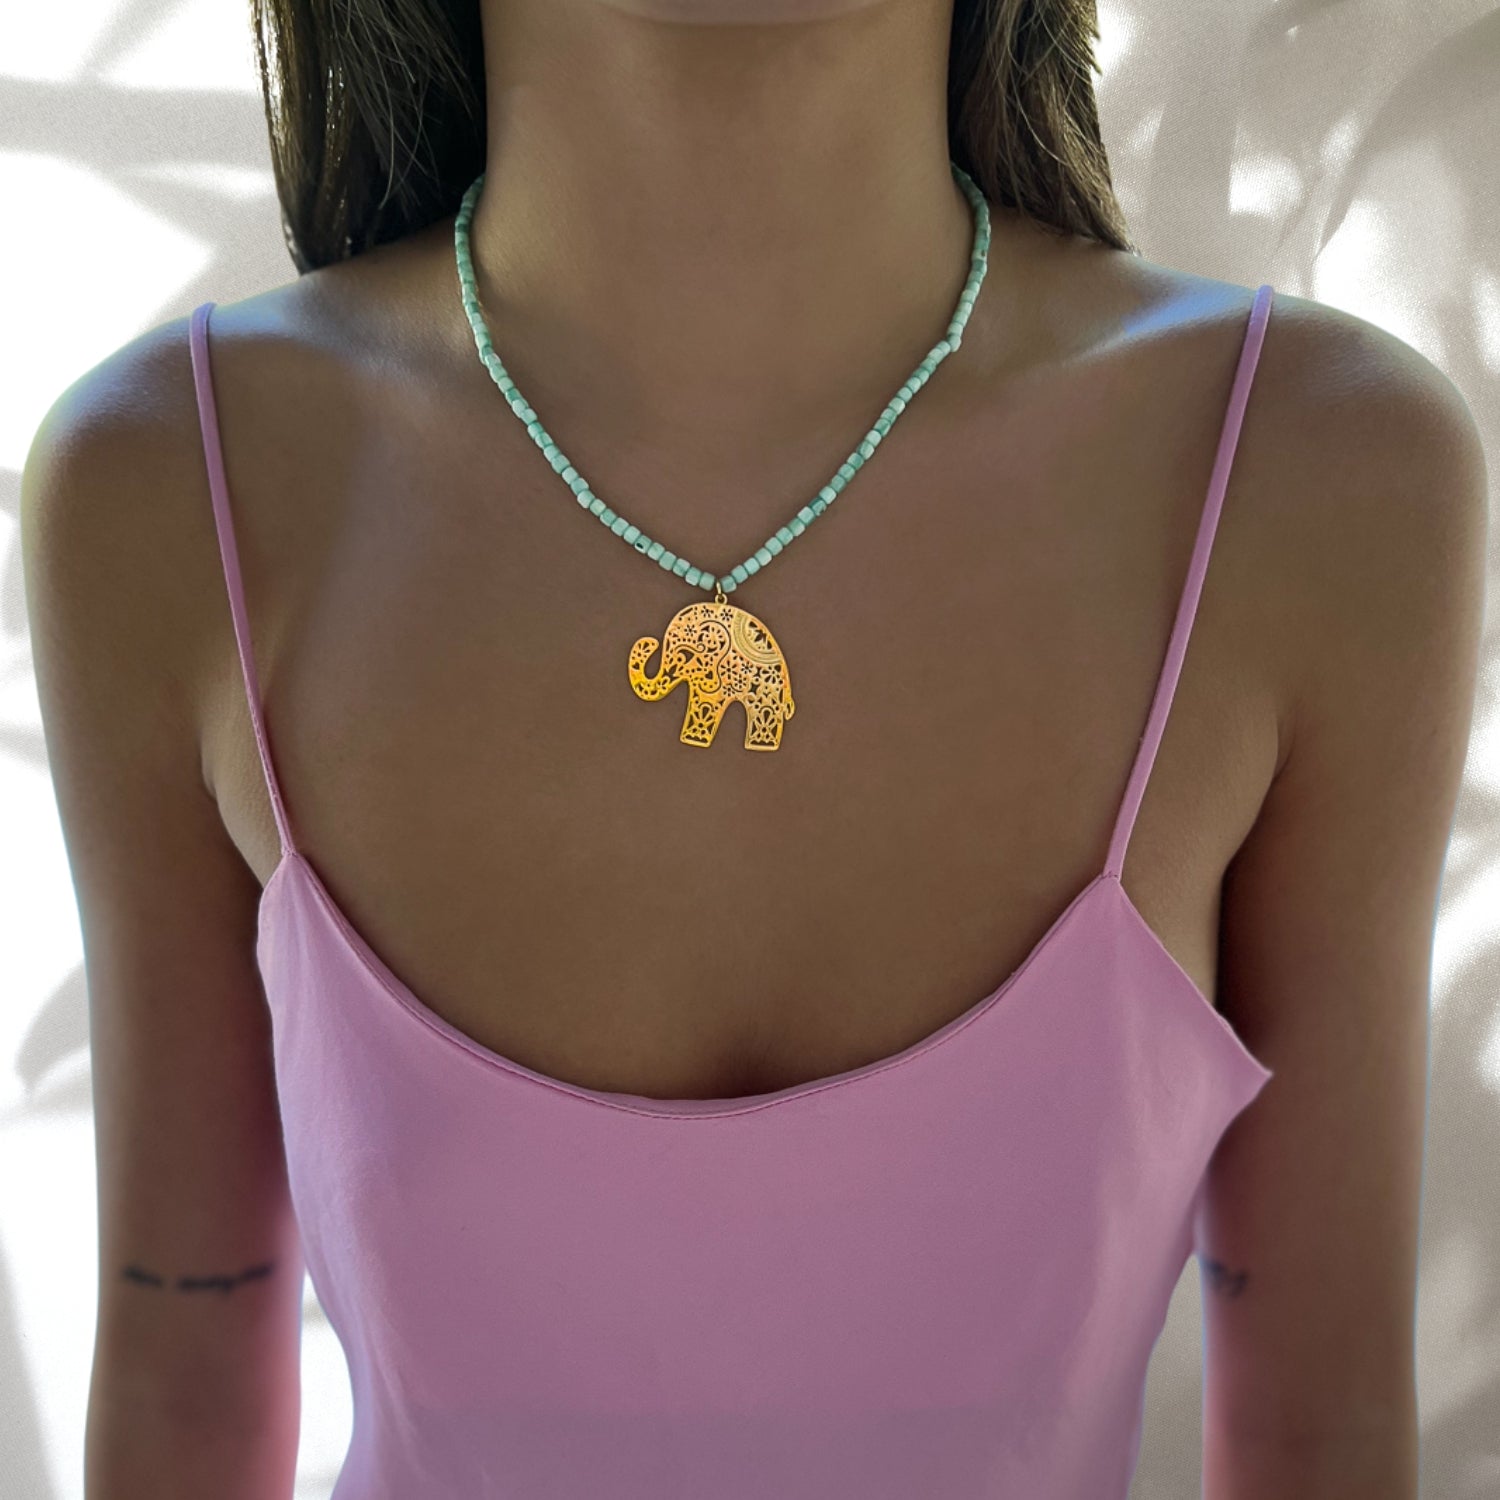 Model wearing Bohemian Elephant Necklace for a Fashionable and Meaningful Look